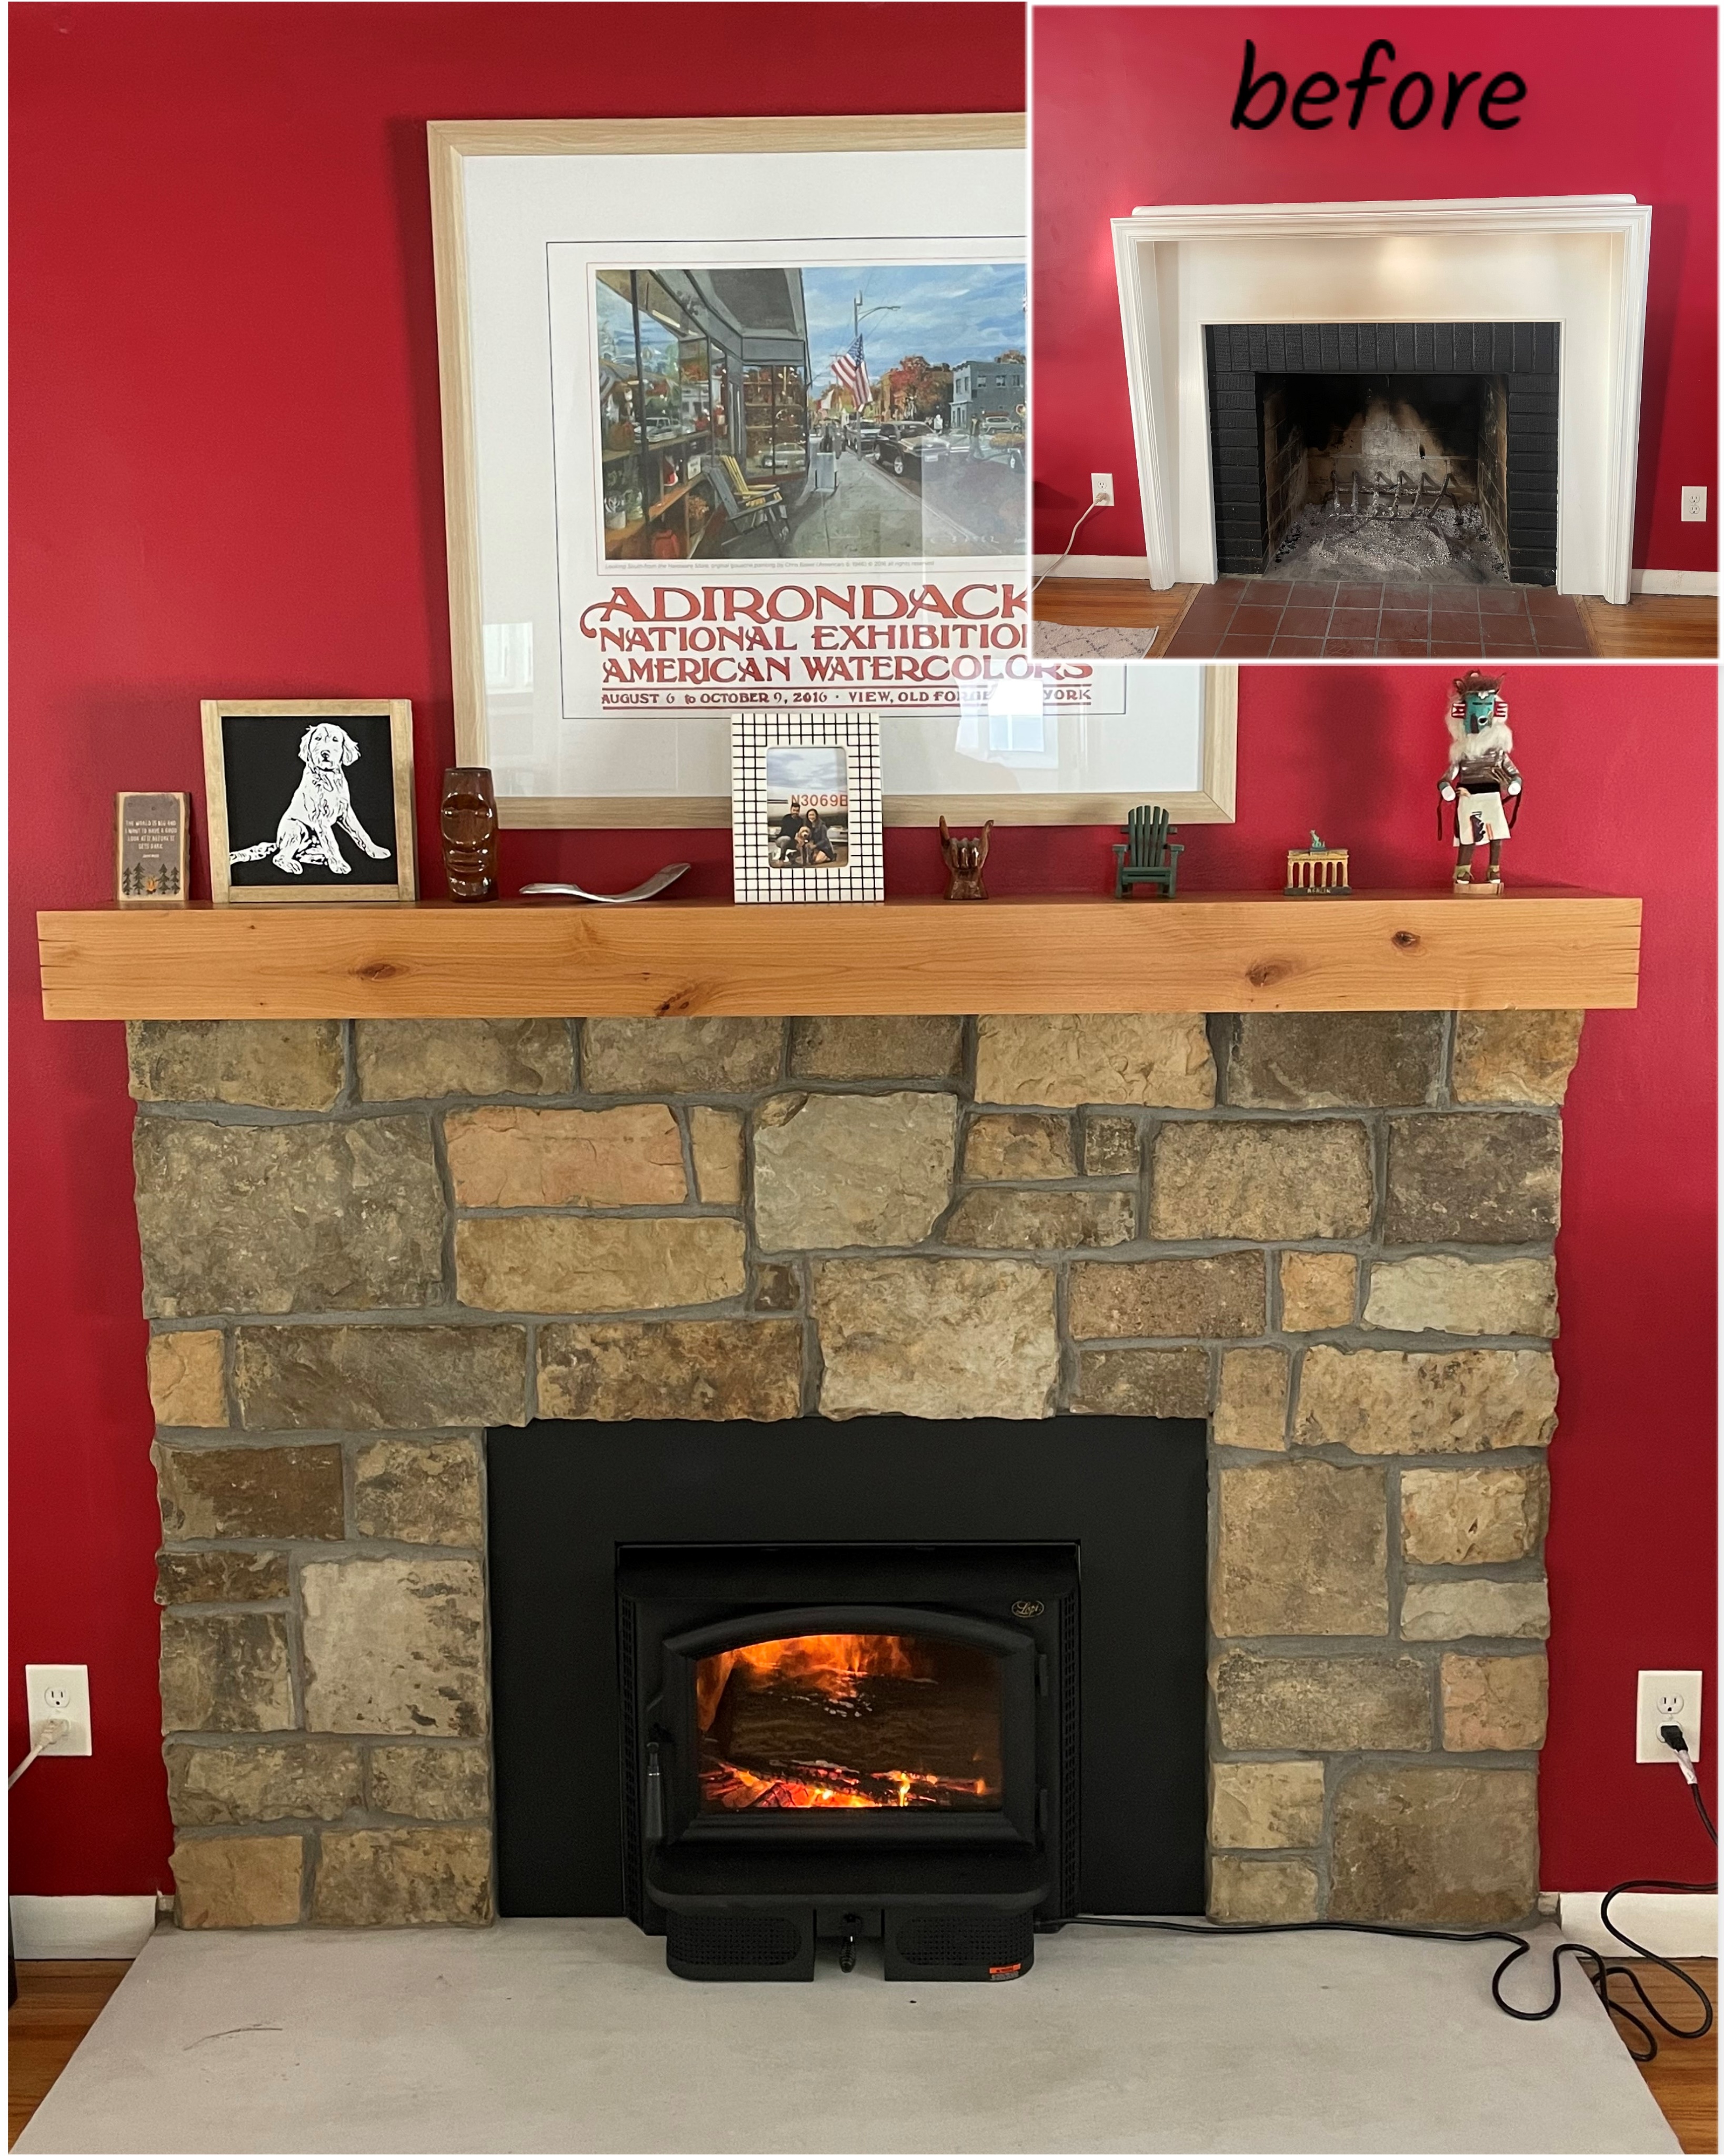 Image of an Answer Wood Insert by Lopi featuring a rustic Cultured Stonework and rustic beam Mantle.